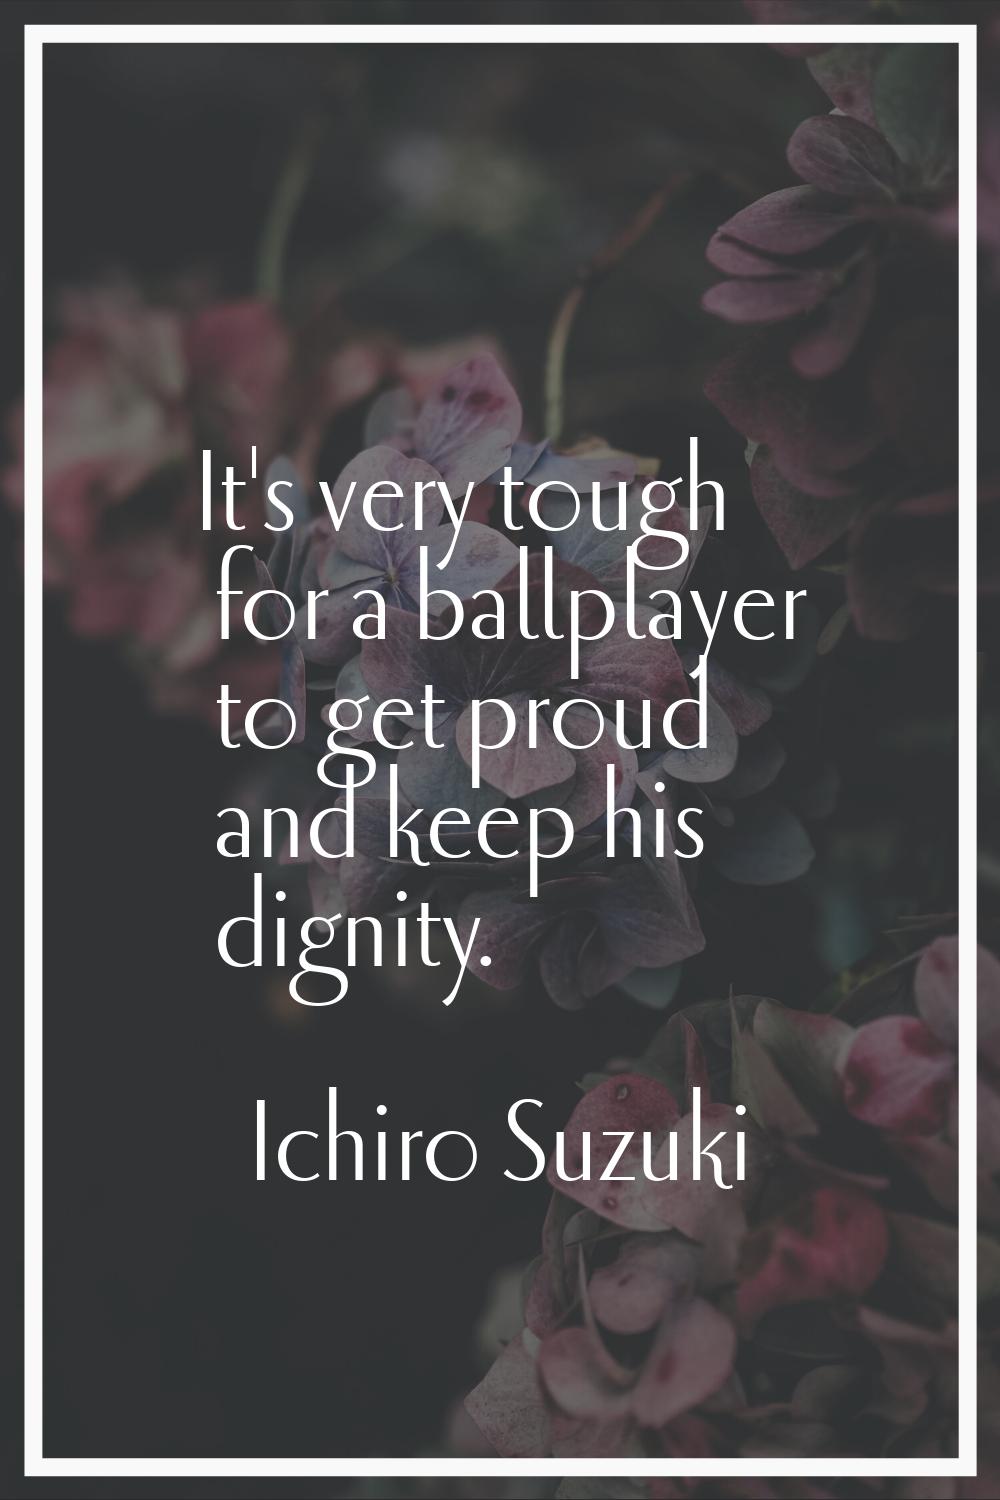 It's very tough for a ballplayer to get proud and keep his dignity.